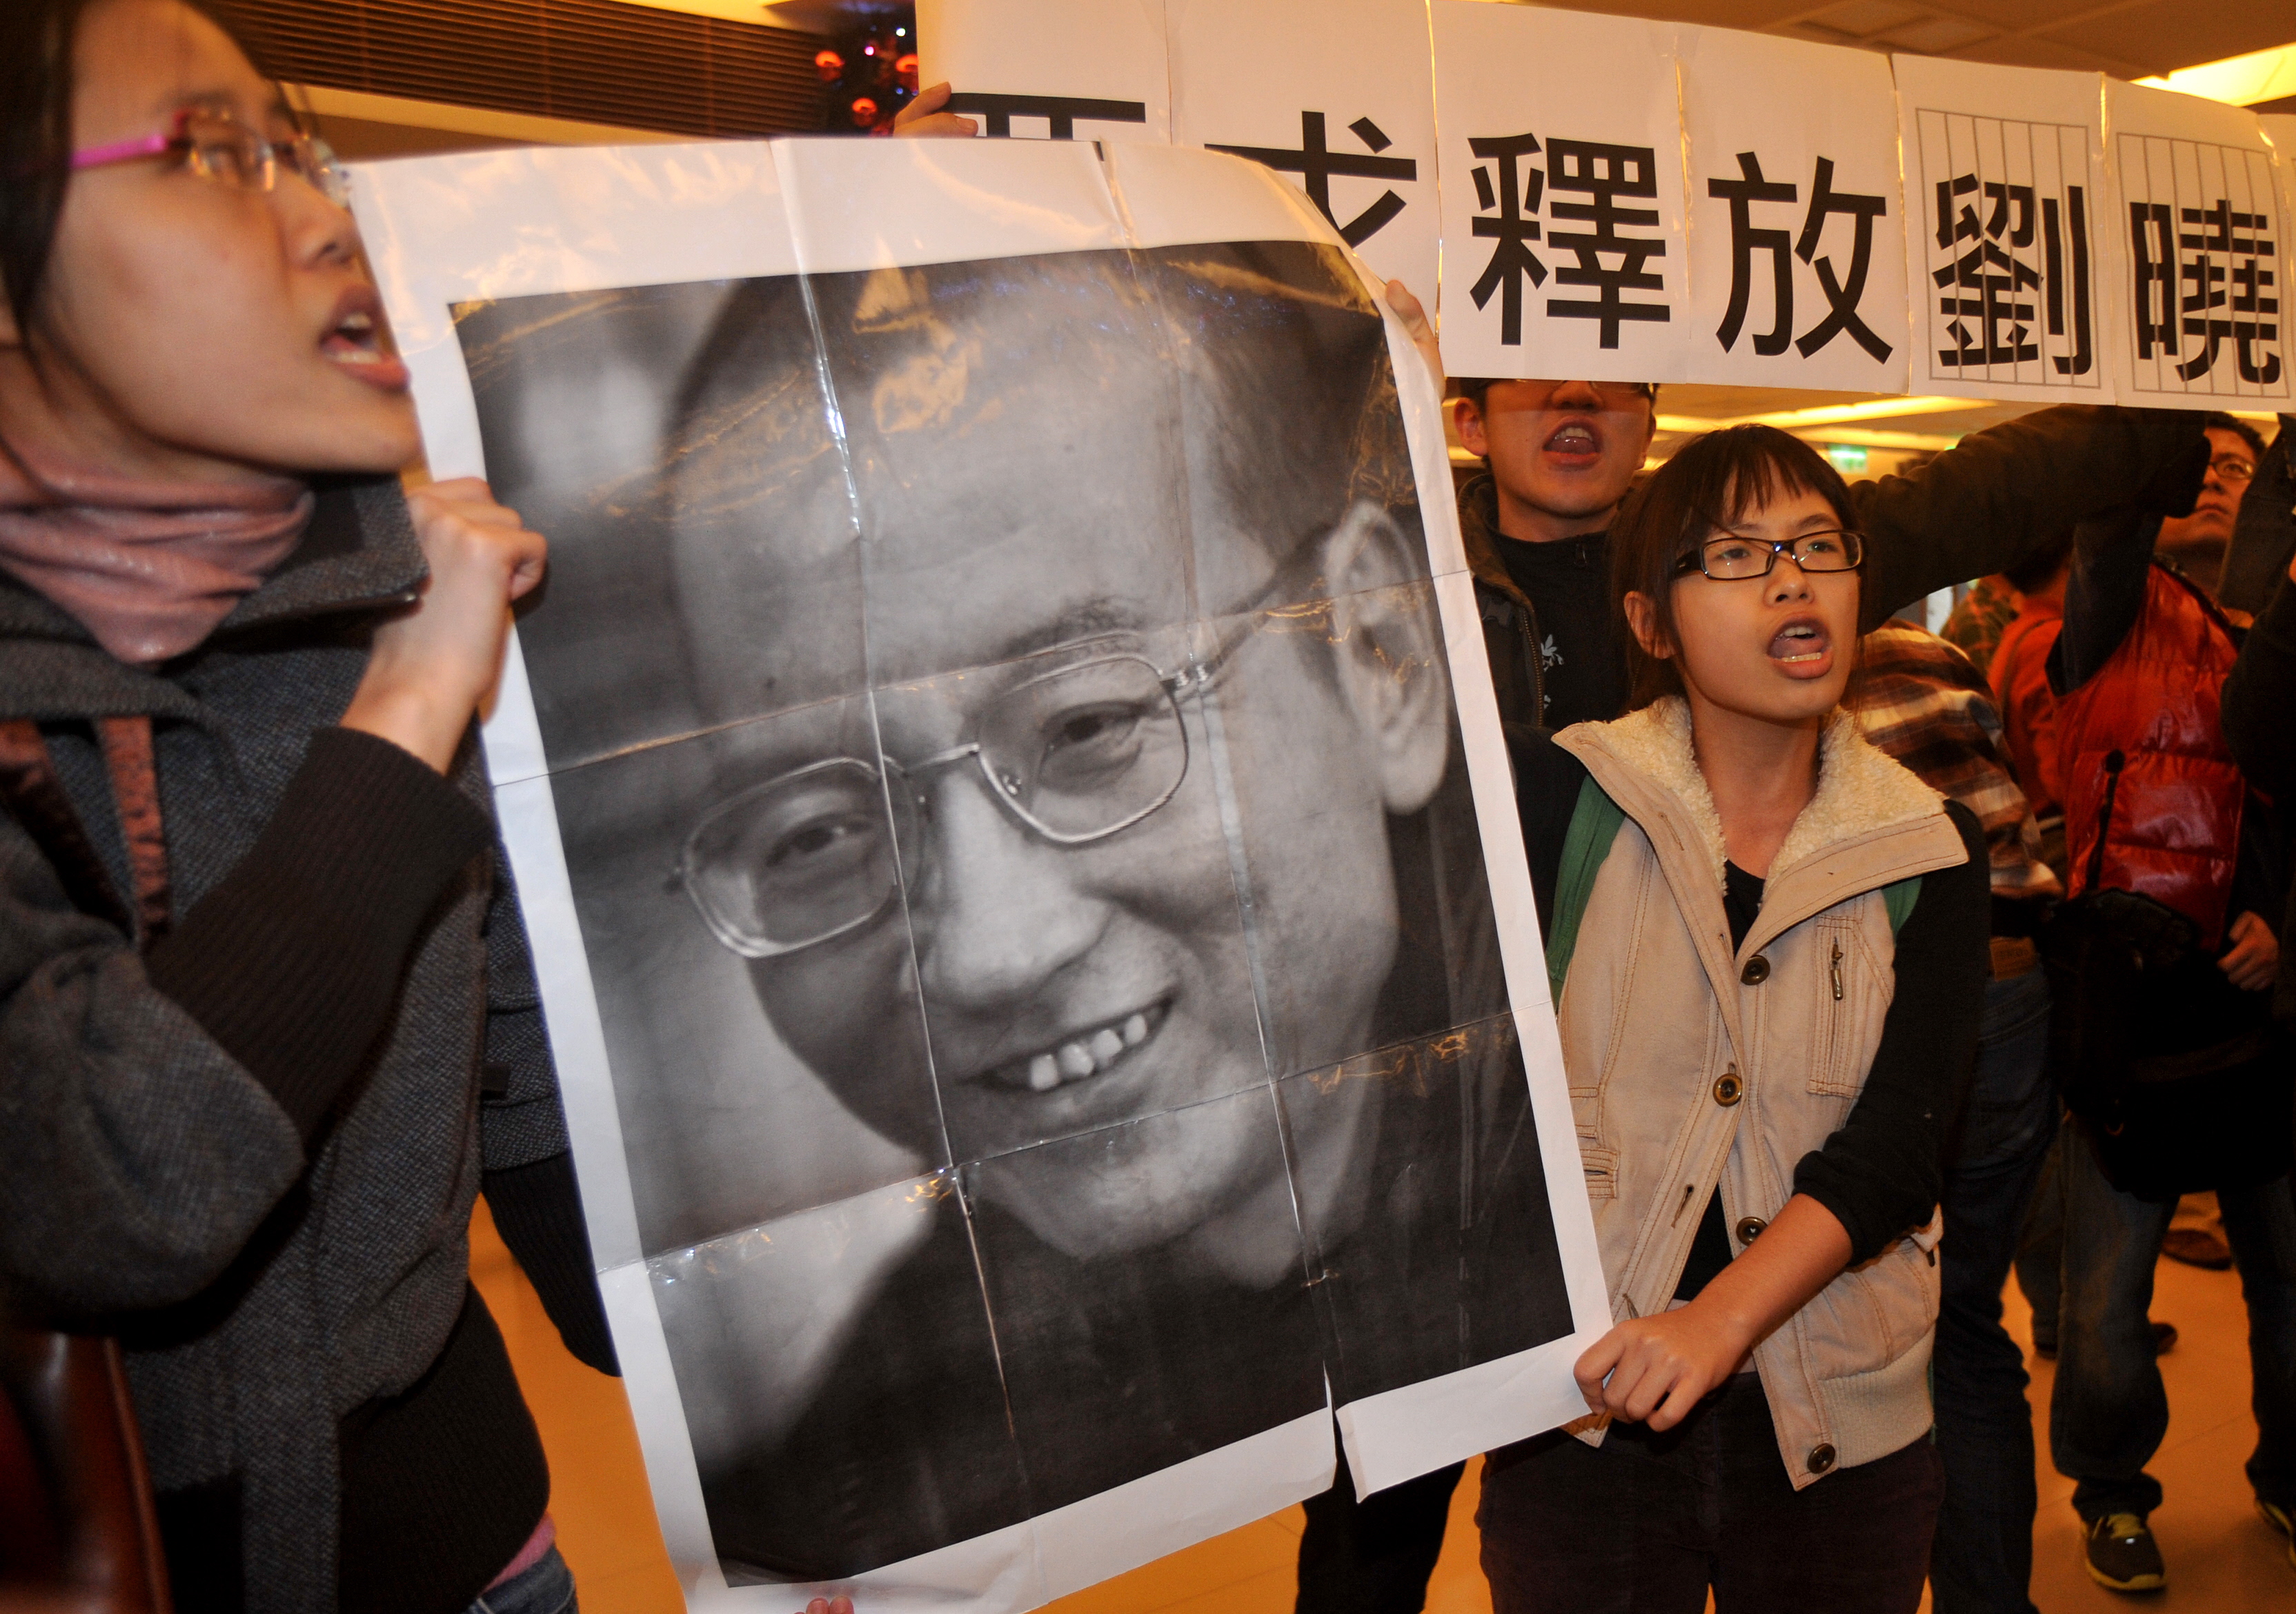 Demonstrators hold a portrait of China's